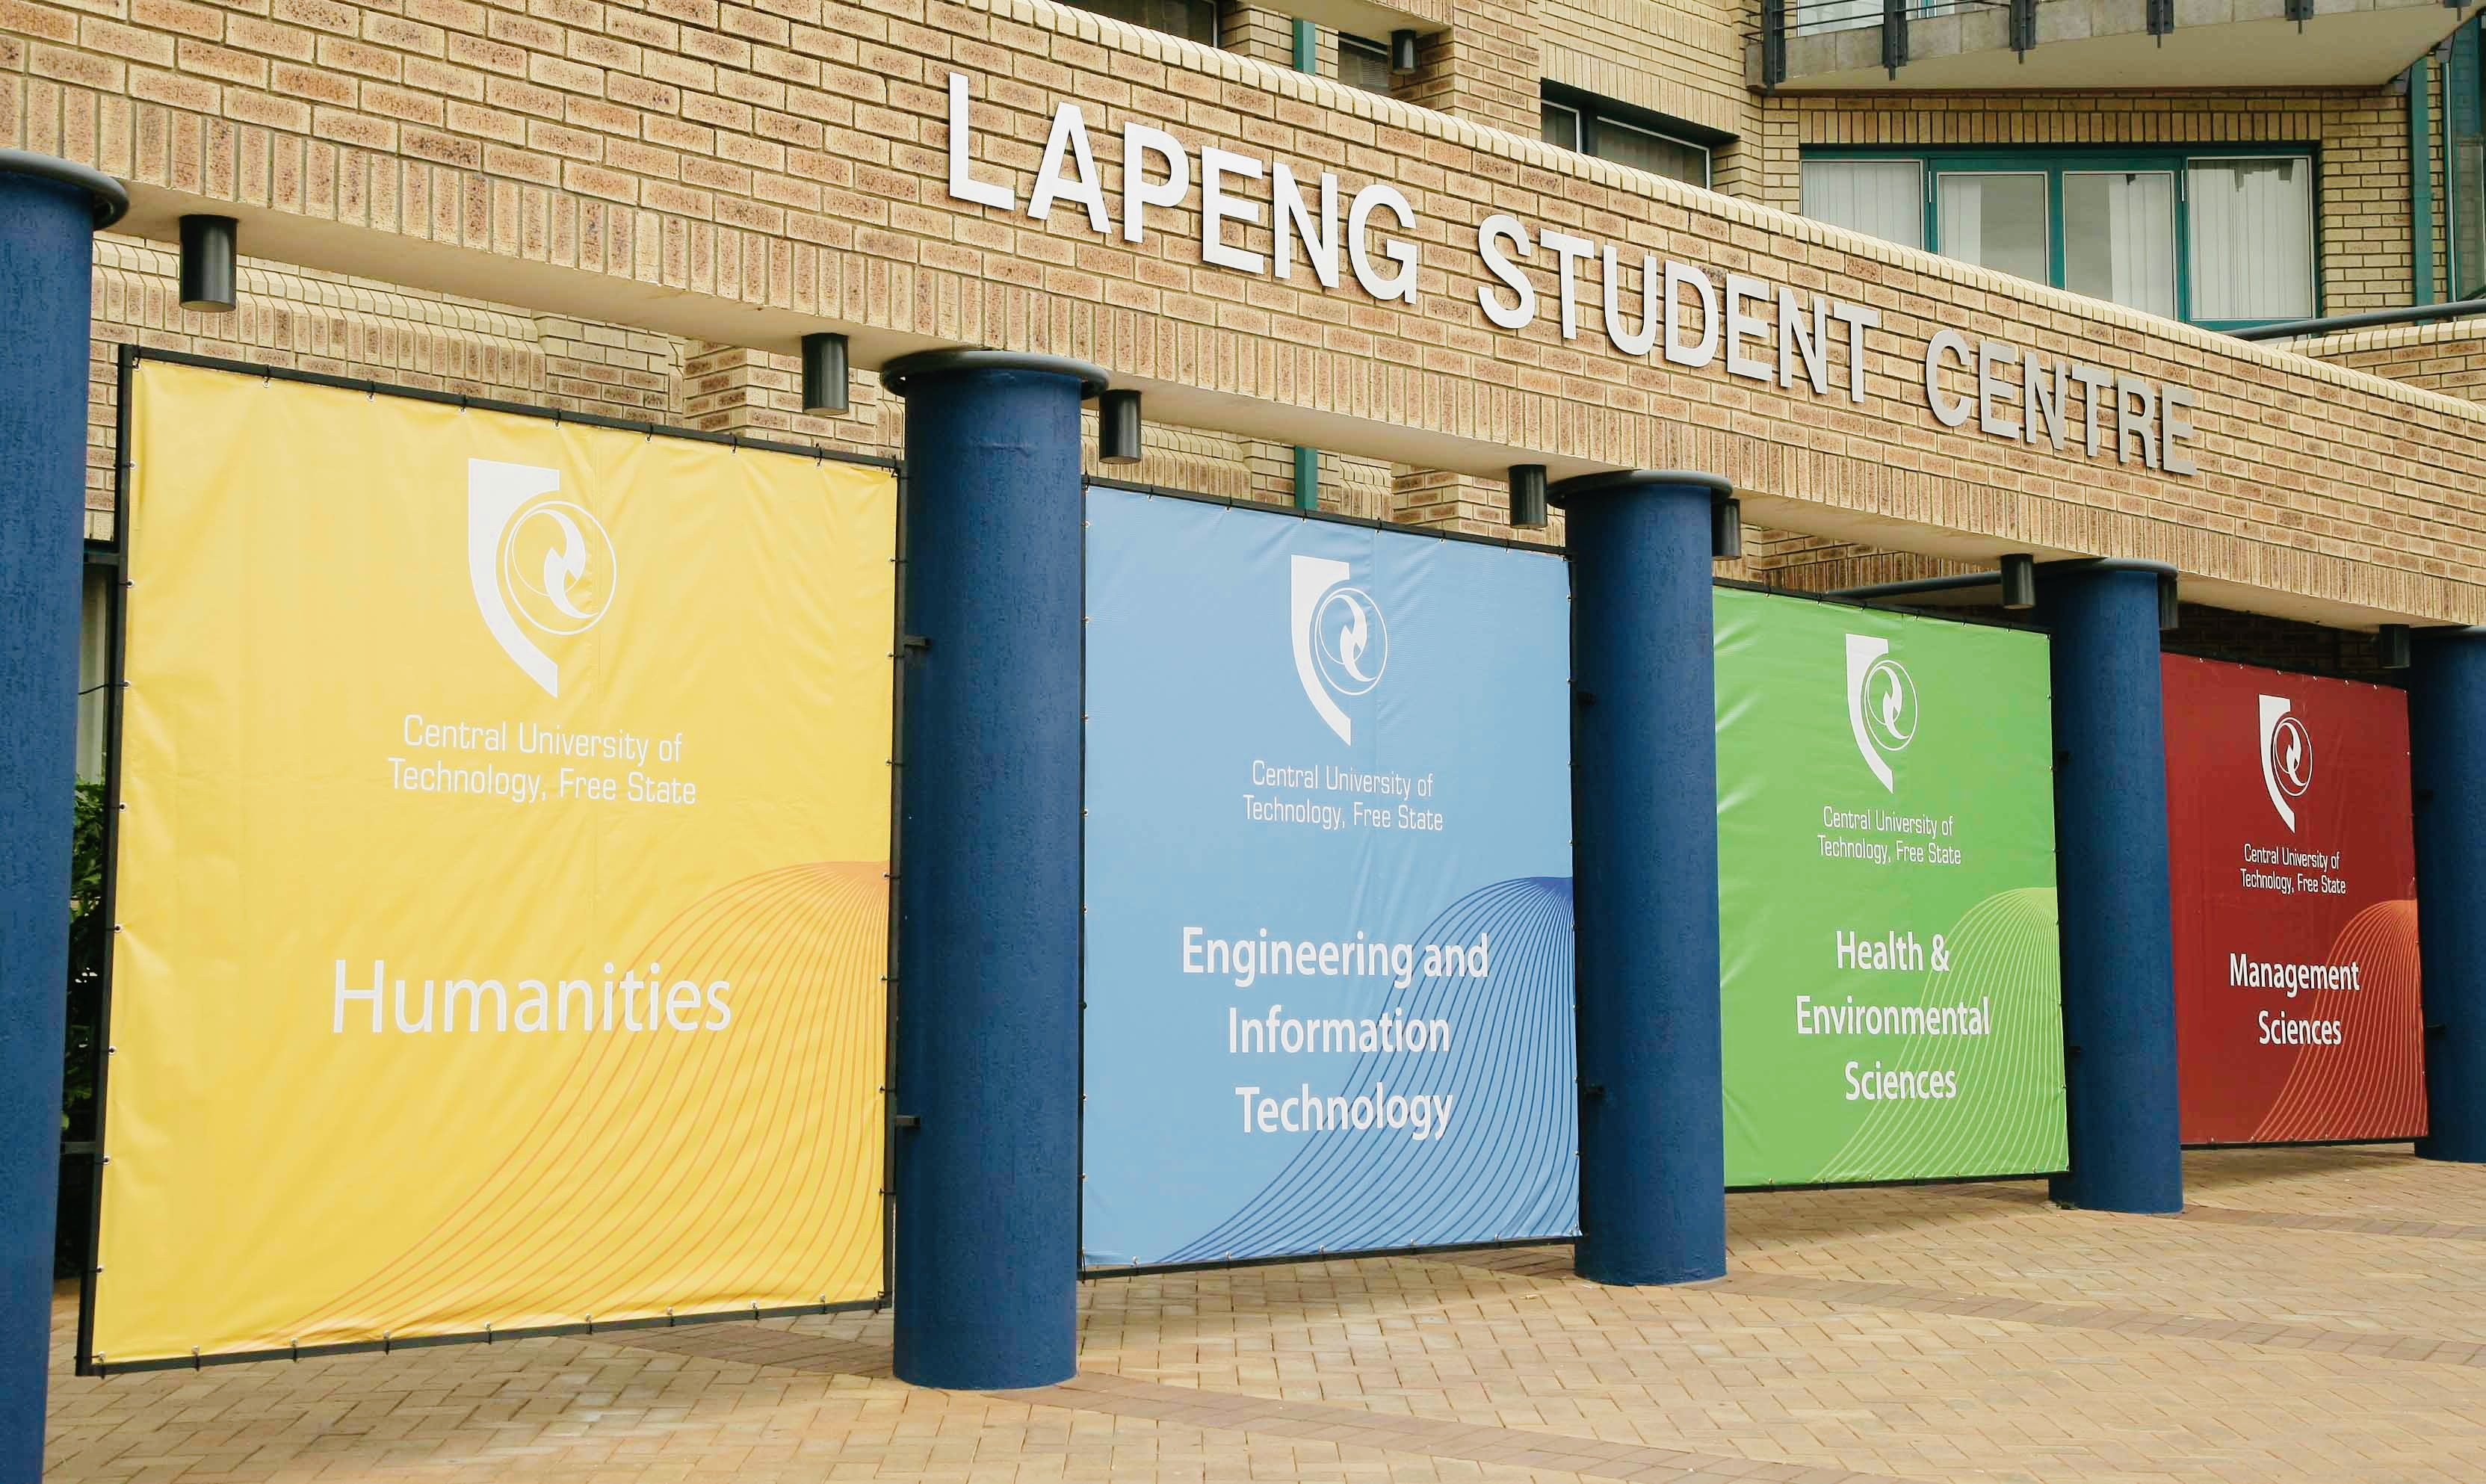 Shape your future at South Africa’s Central University of Technology